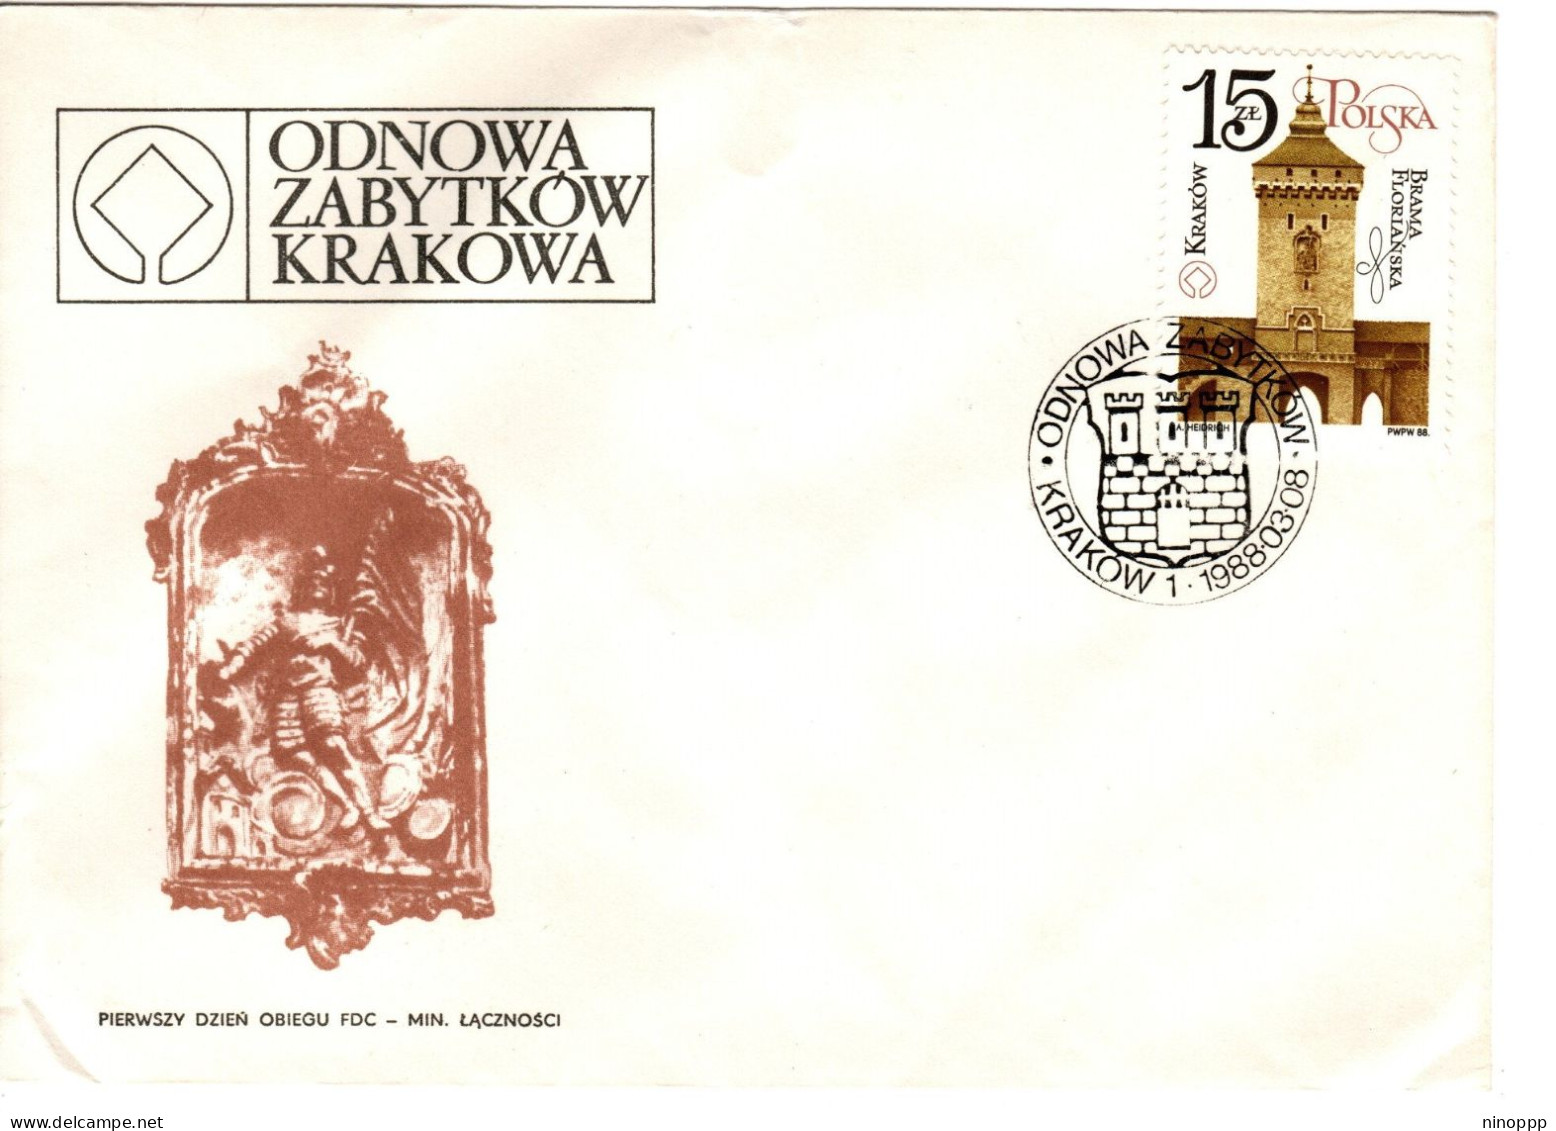 Poland 1988 Cracov Restoration  First Day Cover - FDC